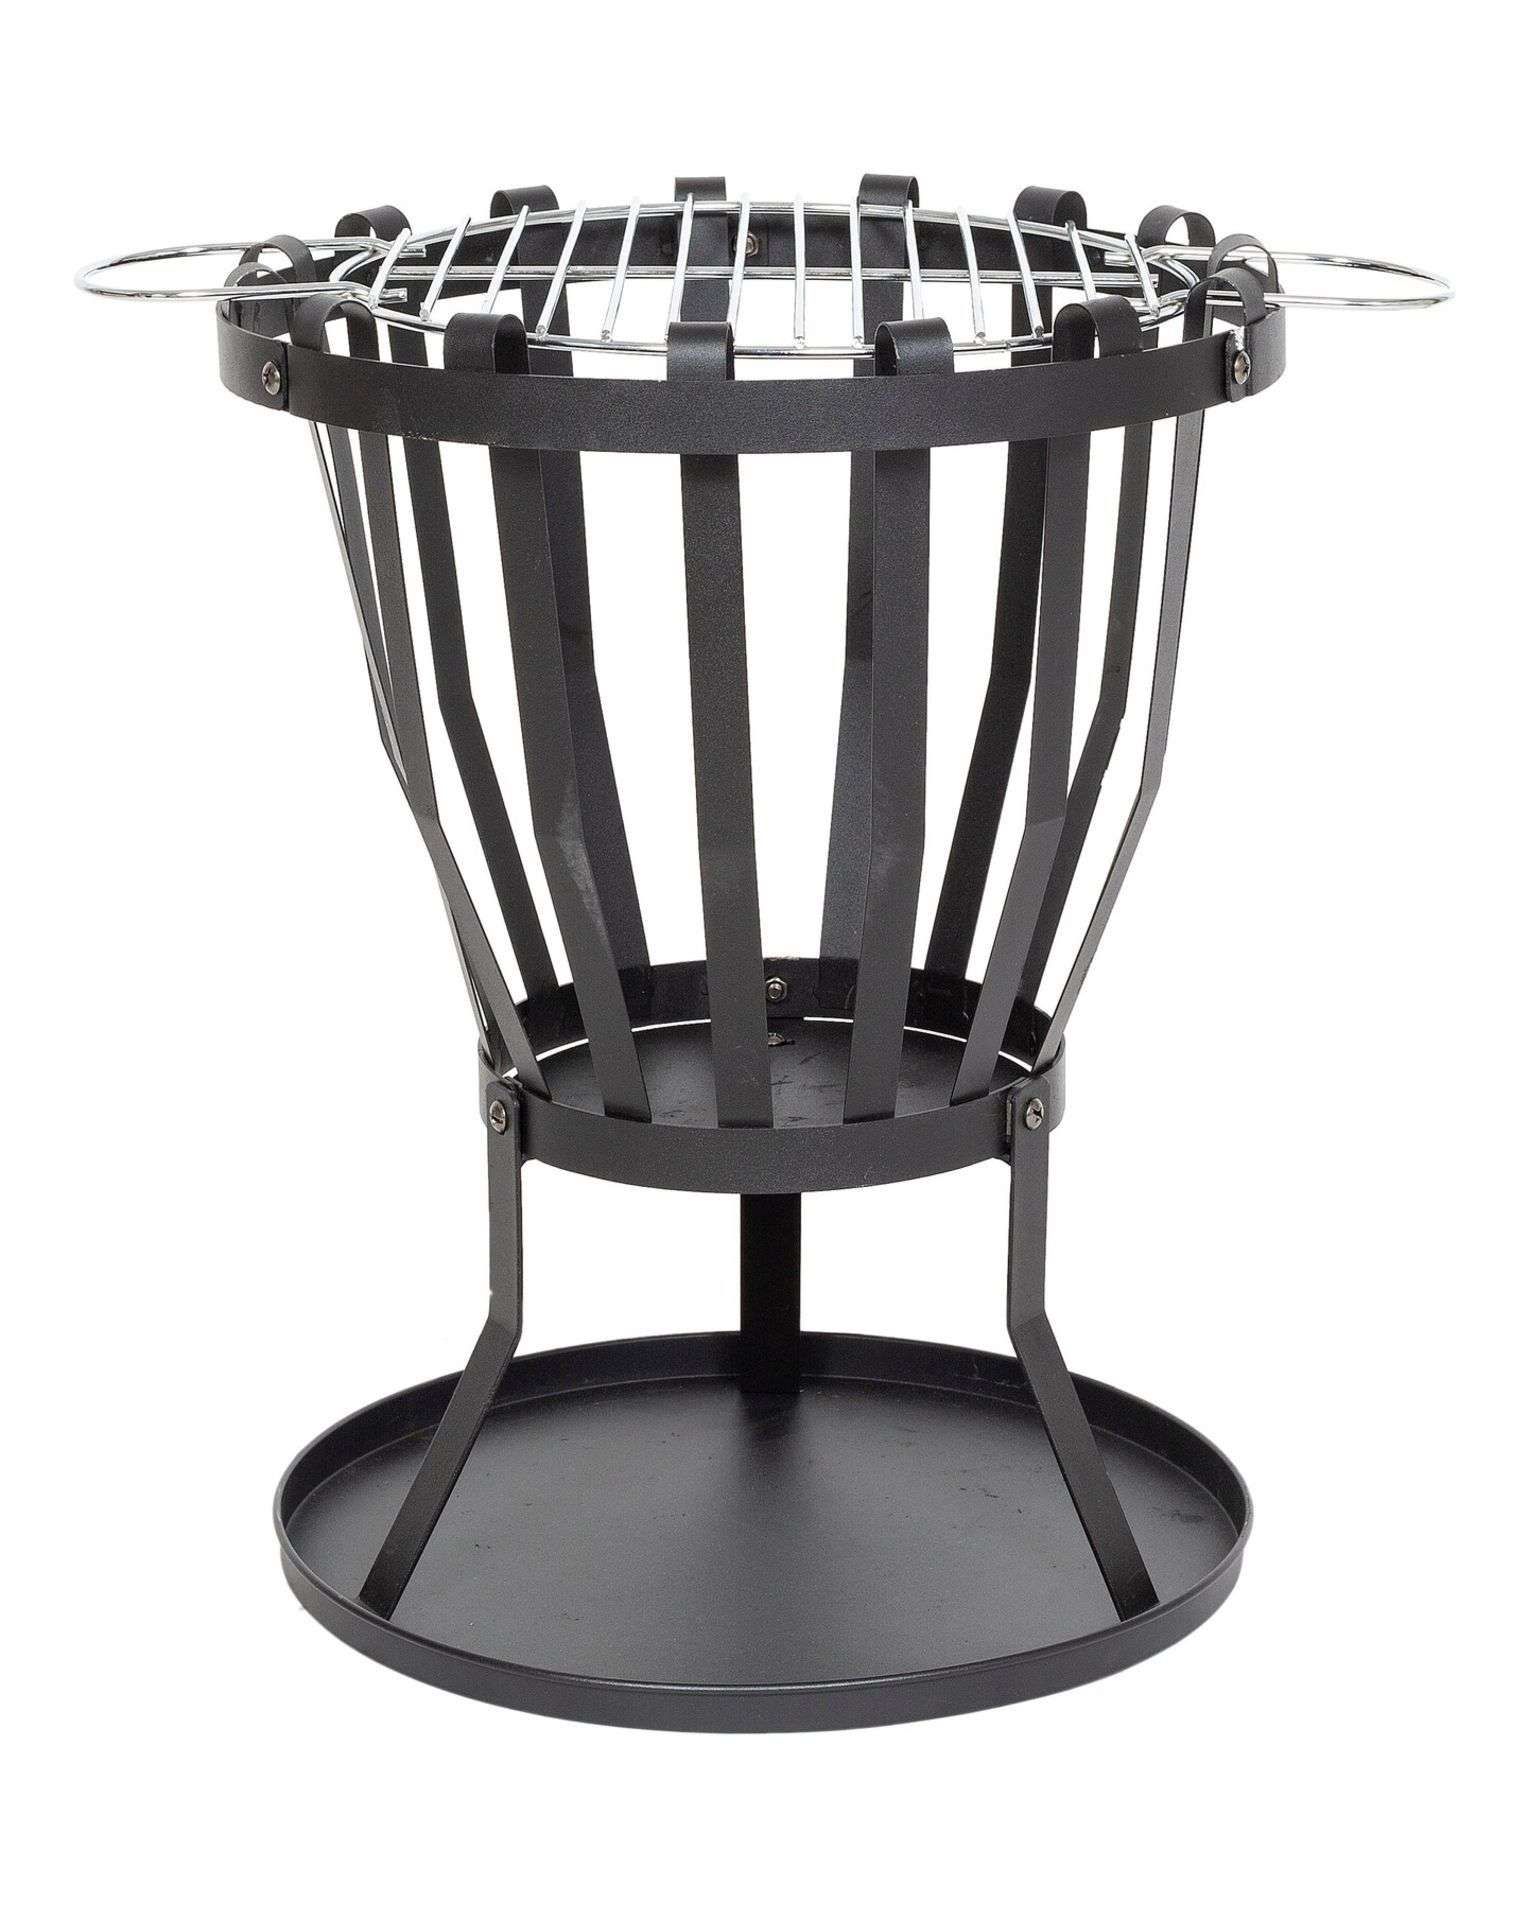 2x NEW & BOXED LA HACIENDA Curitiba Fire Basket with Cooking Grill. RRP £55 EACH. The simple - Bild 2 aus 2